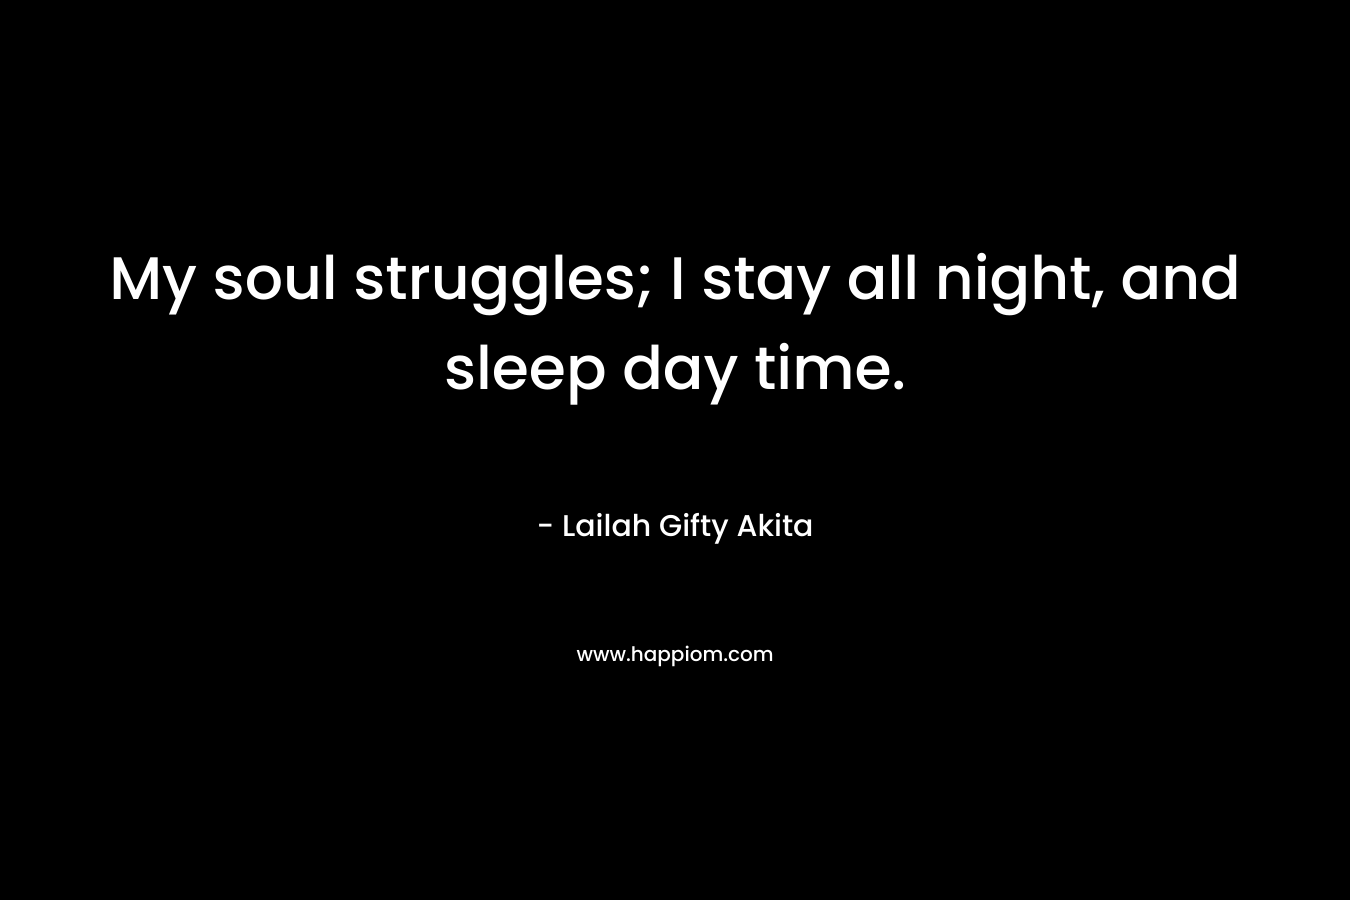 My soul struggles; I stay all night, and sleep day time.